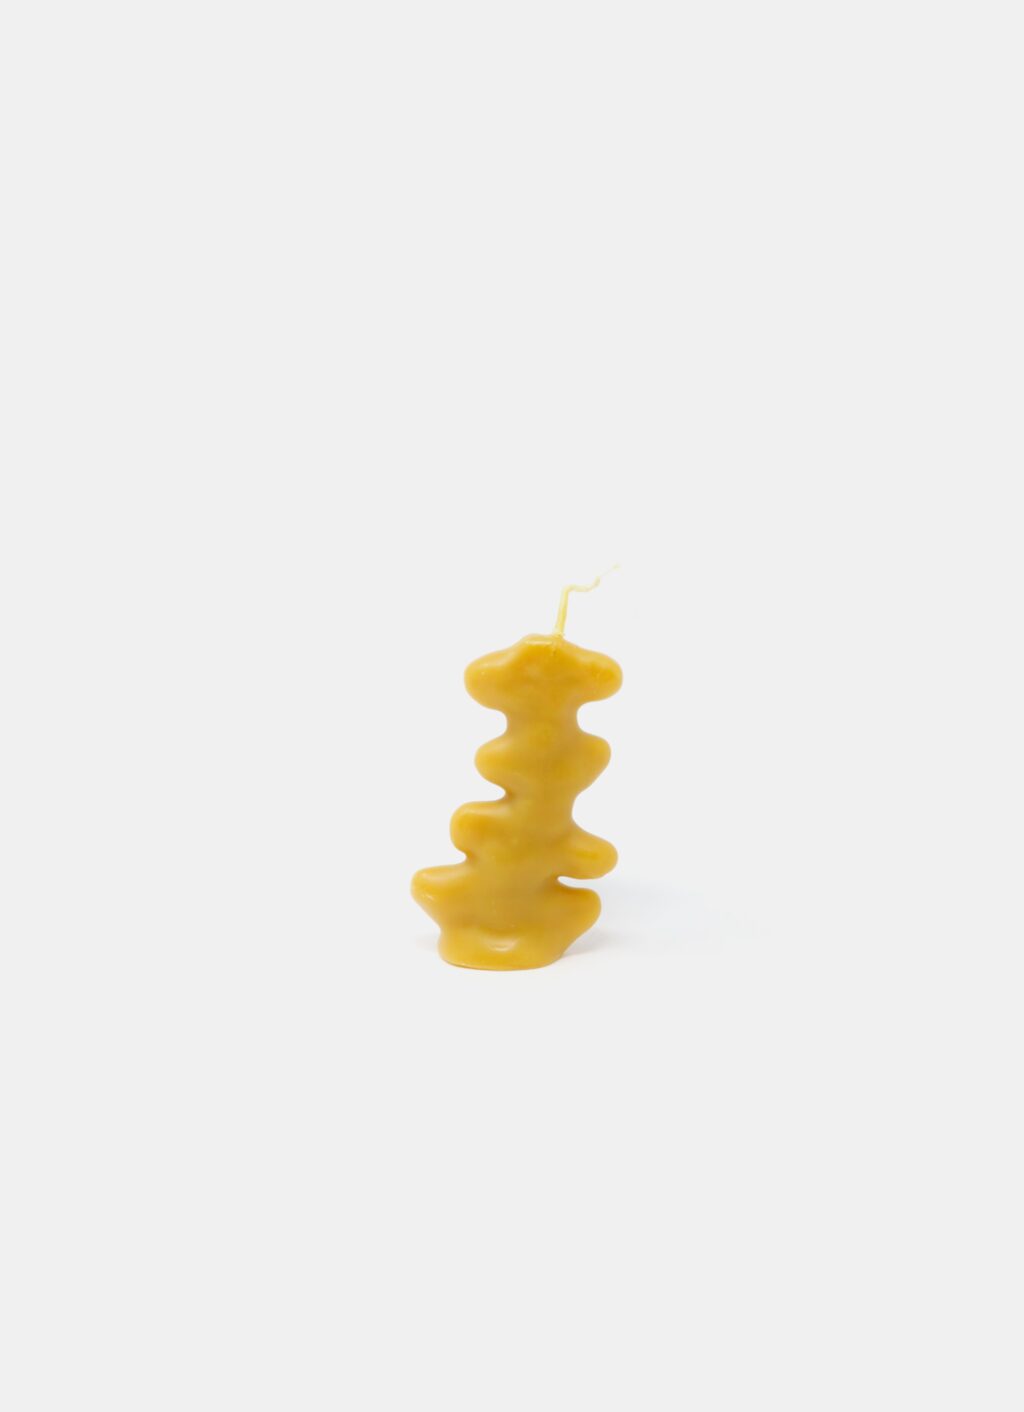 Camille Romagnani - Seaweed - Beeswax Candle